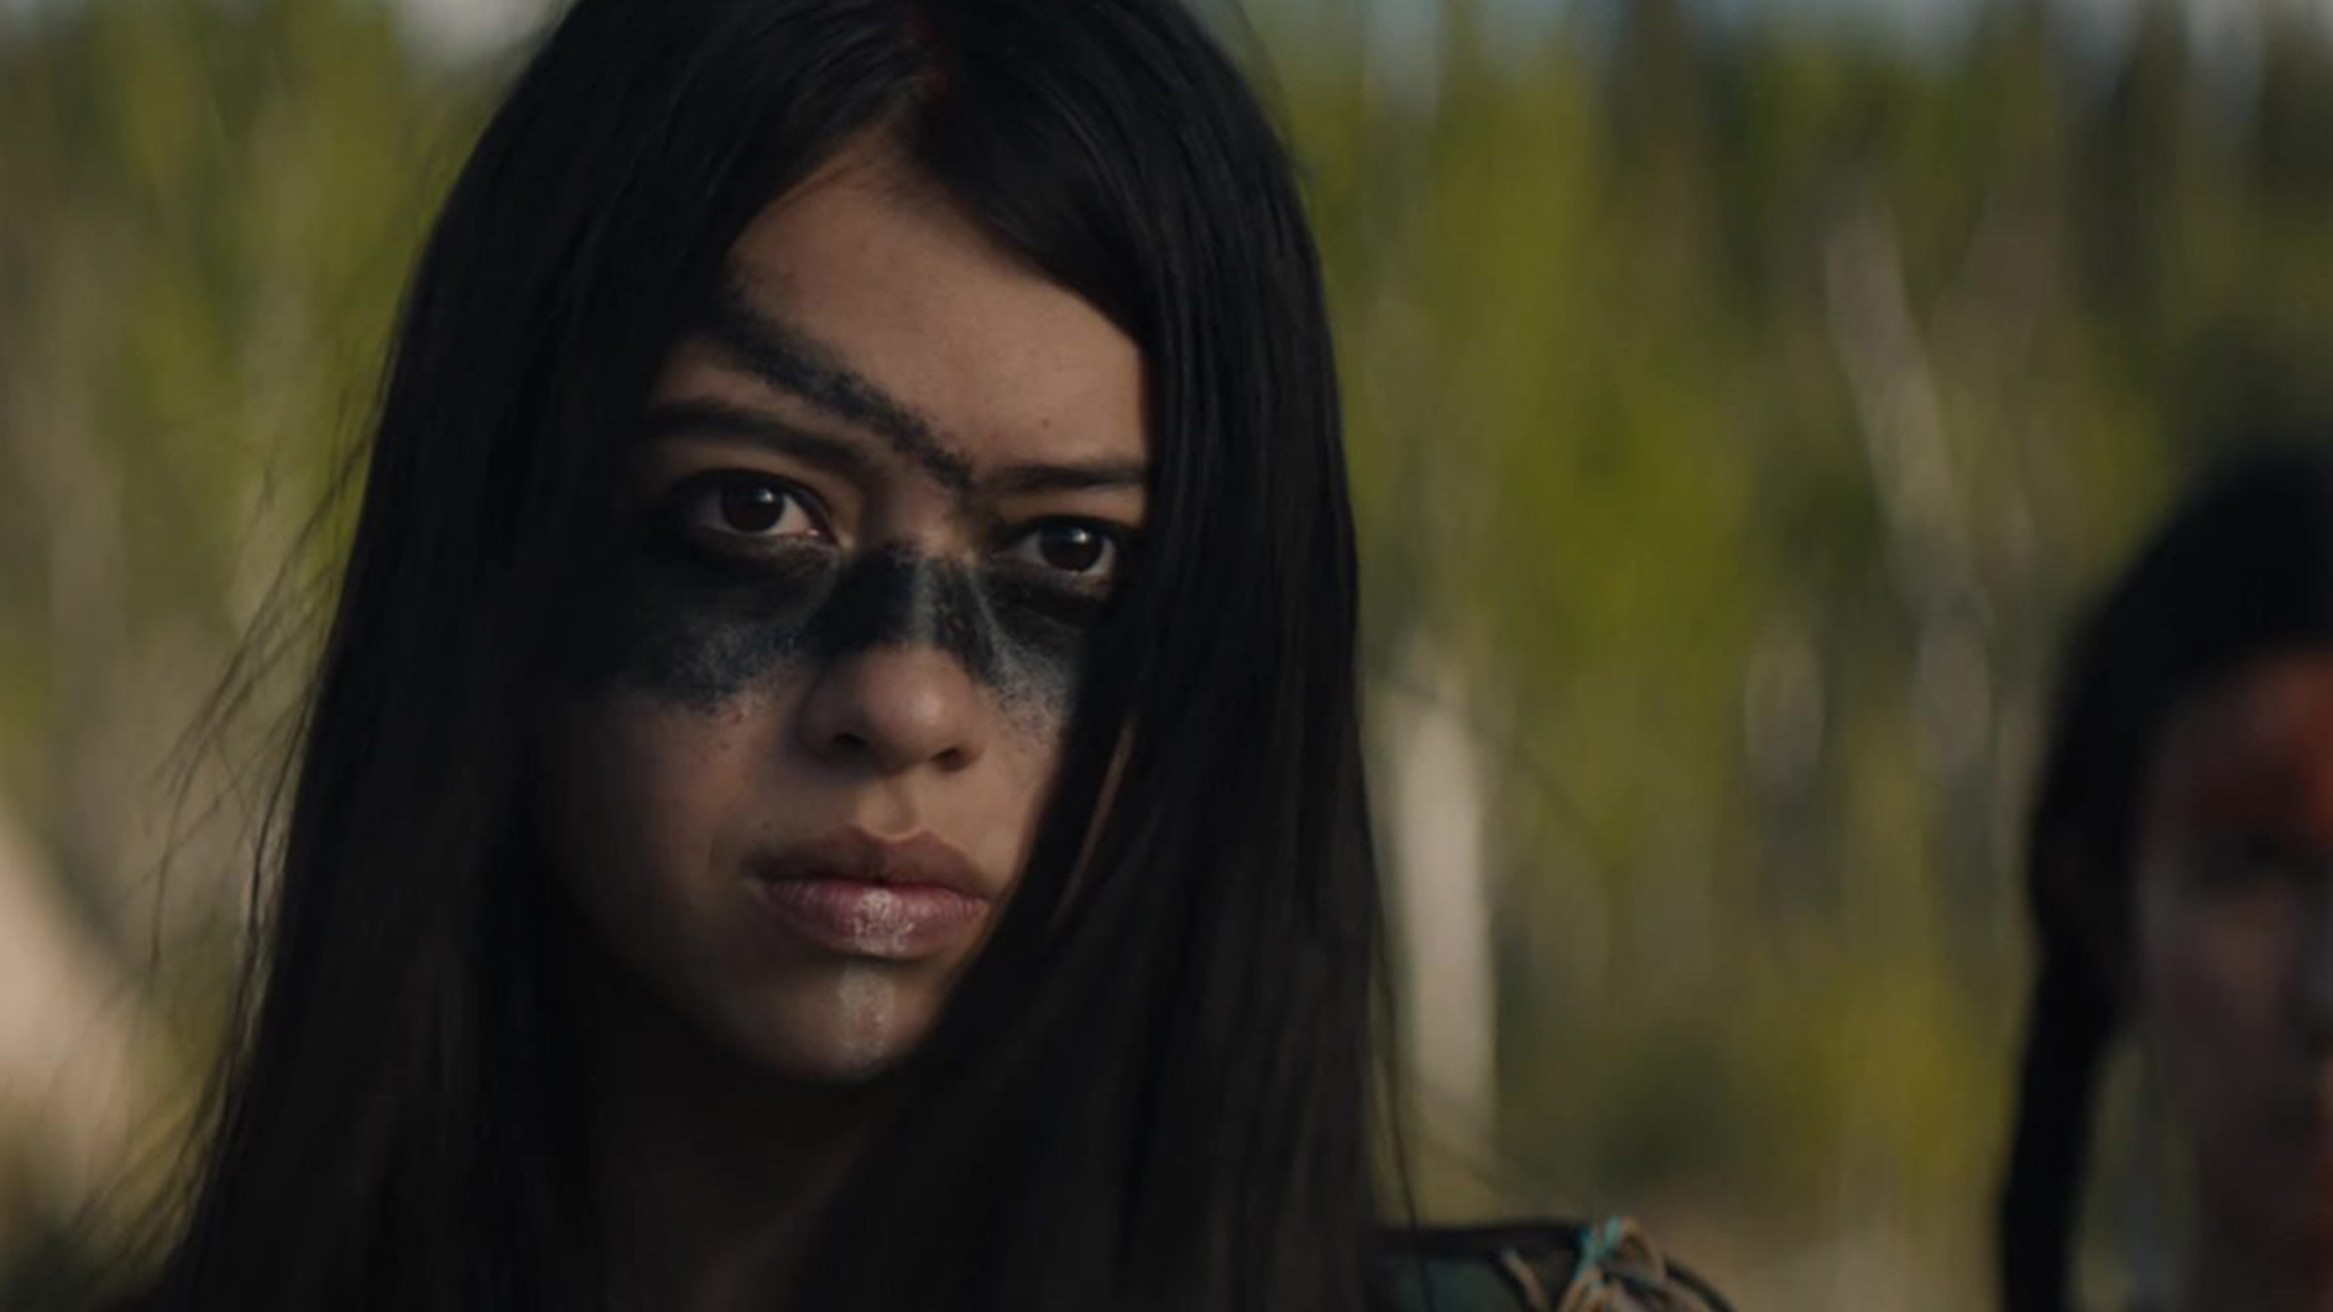 A close-up of the film's lead character Naru, a skilled Comanche warrior, played by Amber Midthunder.